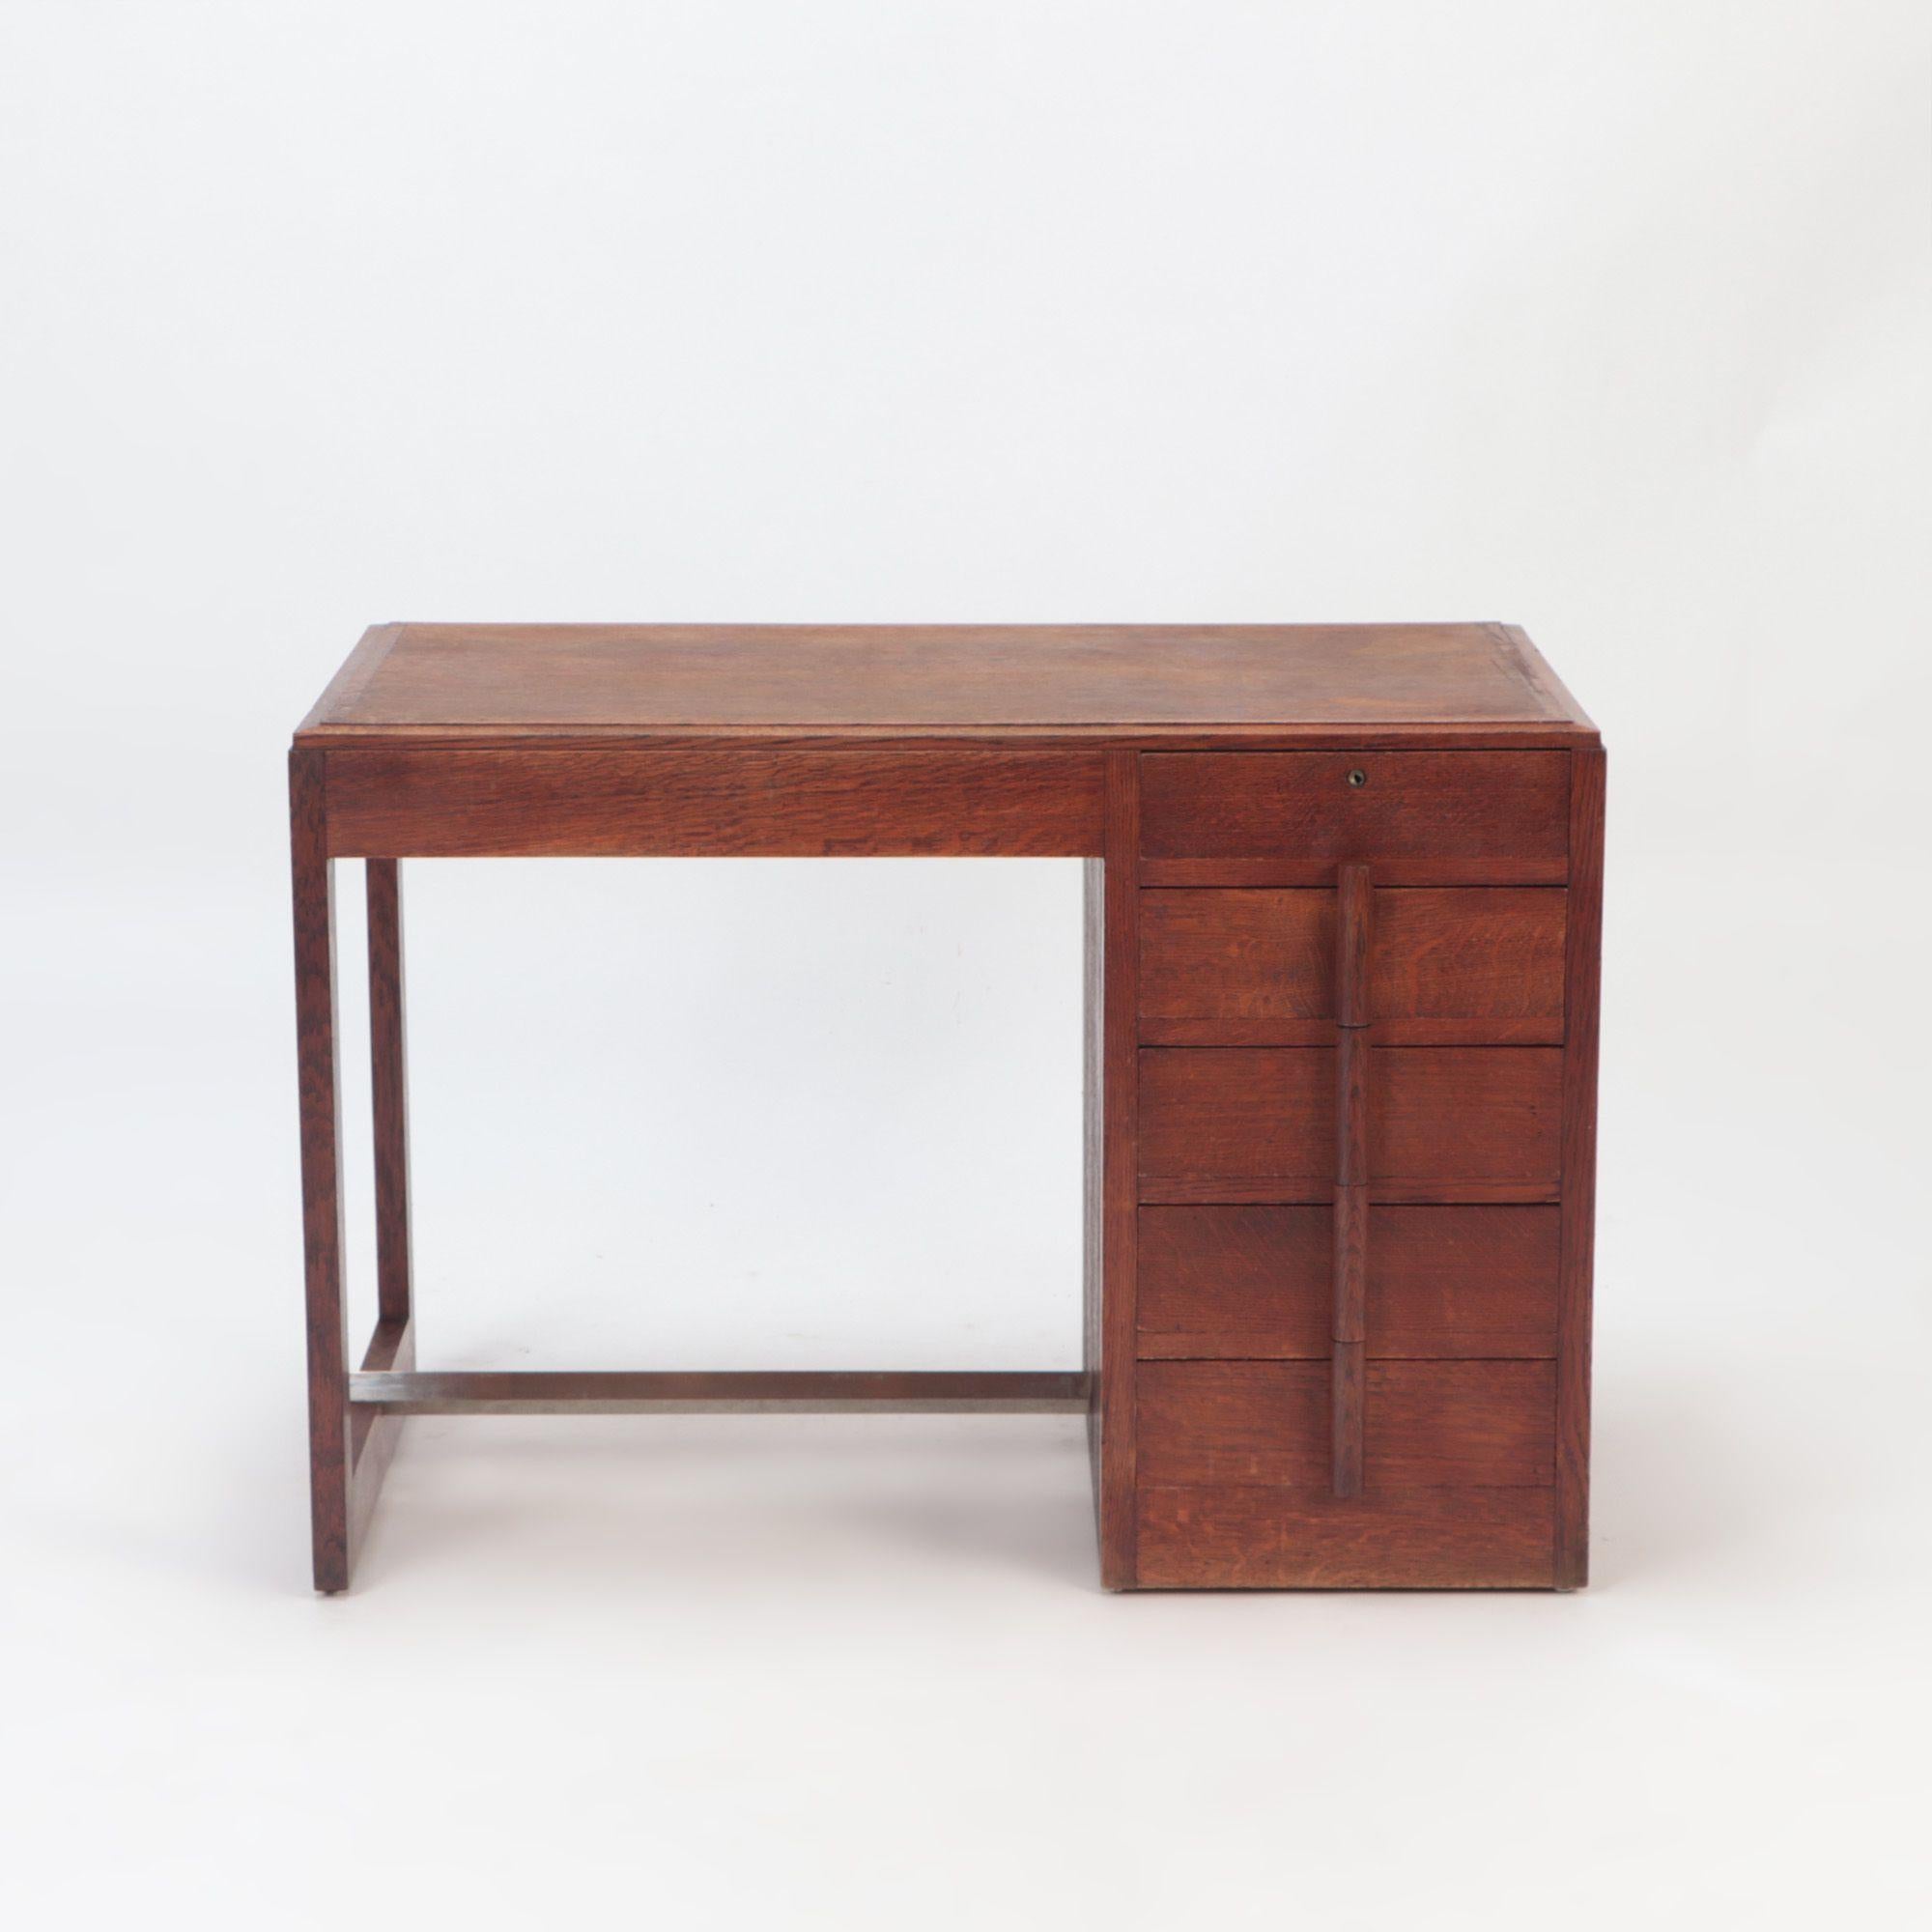 A French oak desk in the manner of Charles Dudouyt. The desk features 5 front drawers and a metal stretcher at the base. Circa 1940.